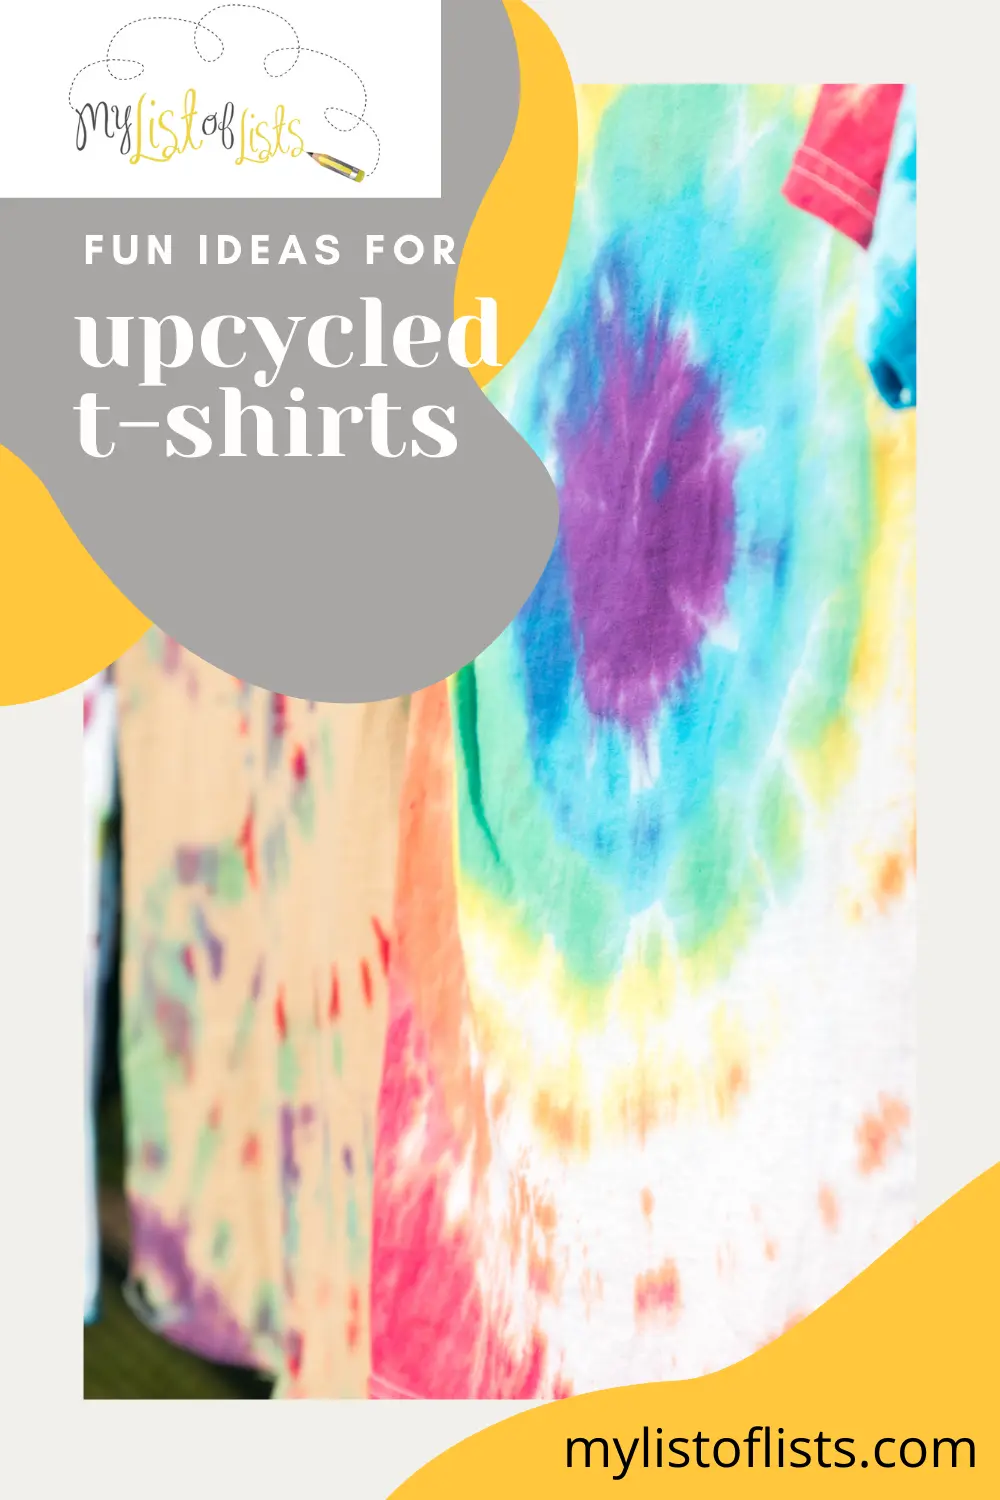 Go through your old shirts and take out your favorites because they are about to get a second chance at life. Take a look at these easy ways to upcycle old t-shirts. It's always best to keep things out of landfills! #gardening #mylistoflistsblog #upcycle